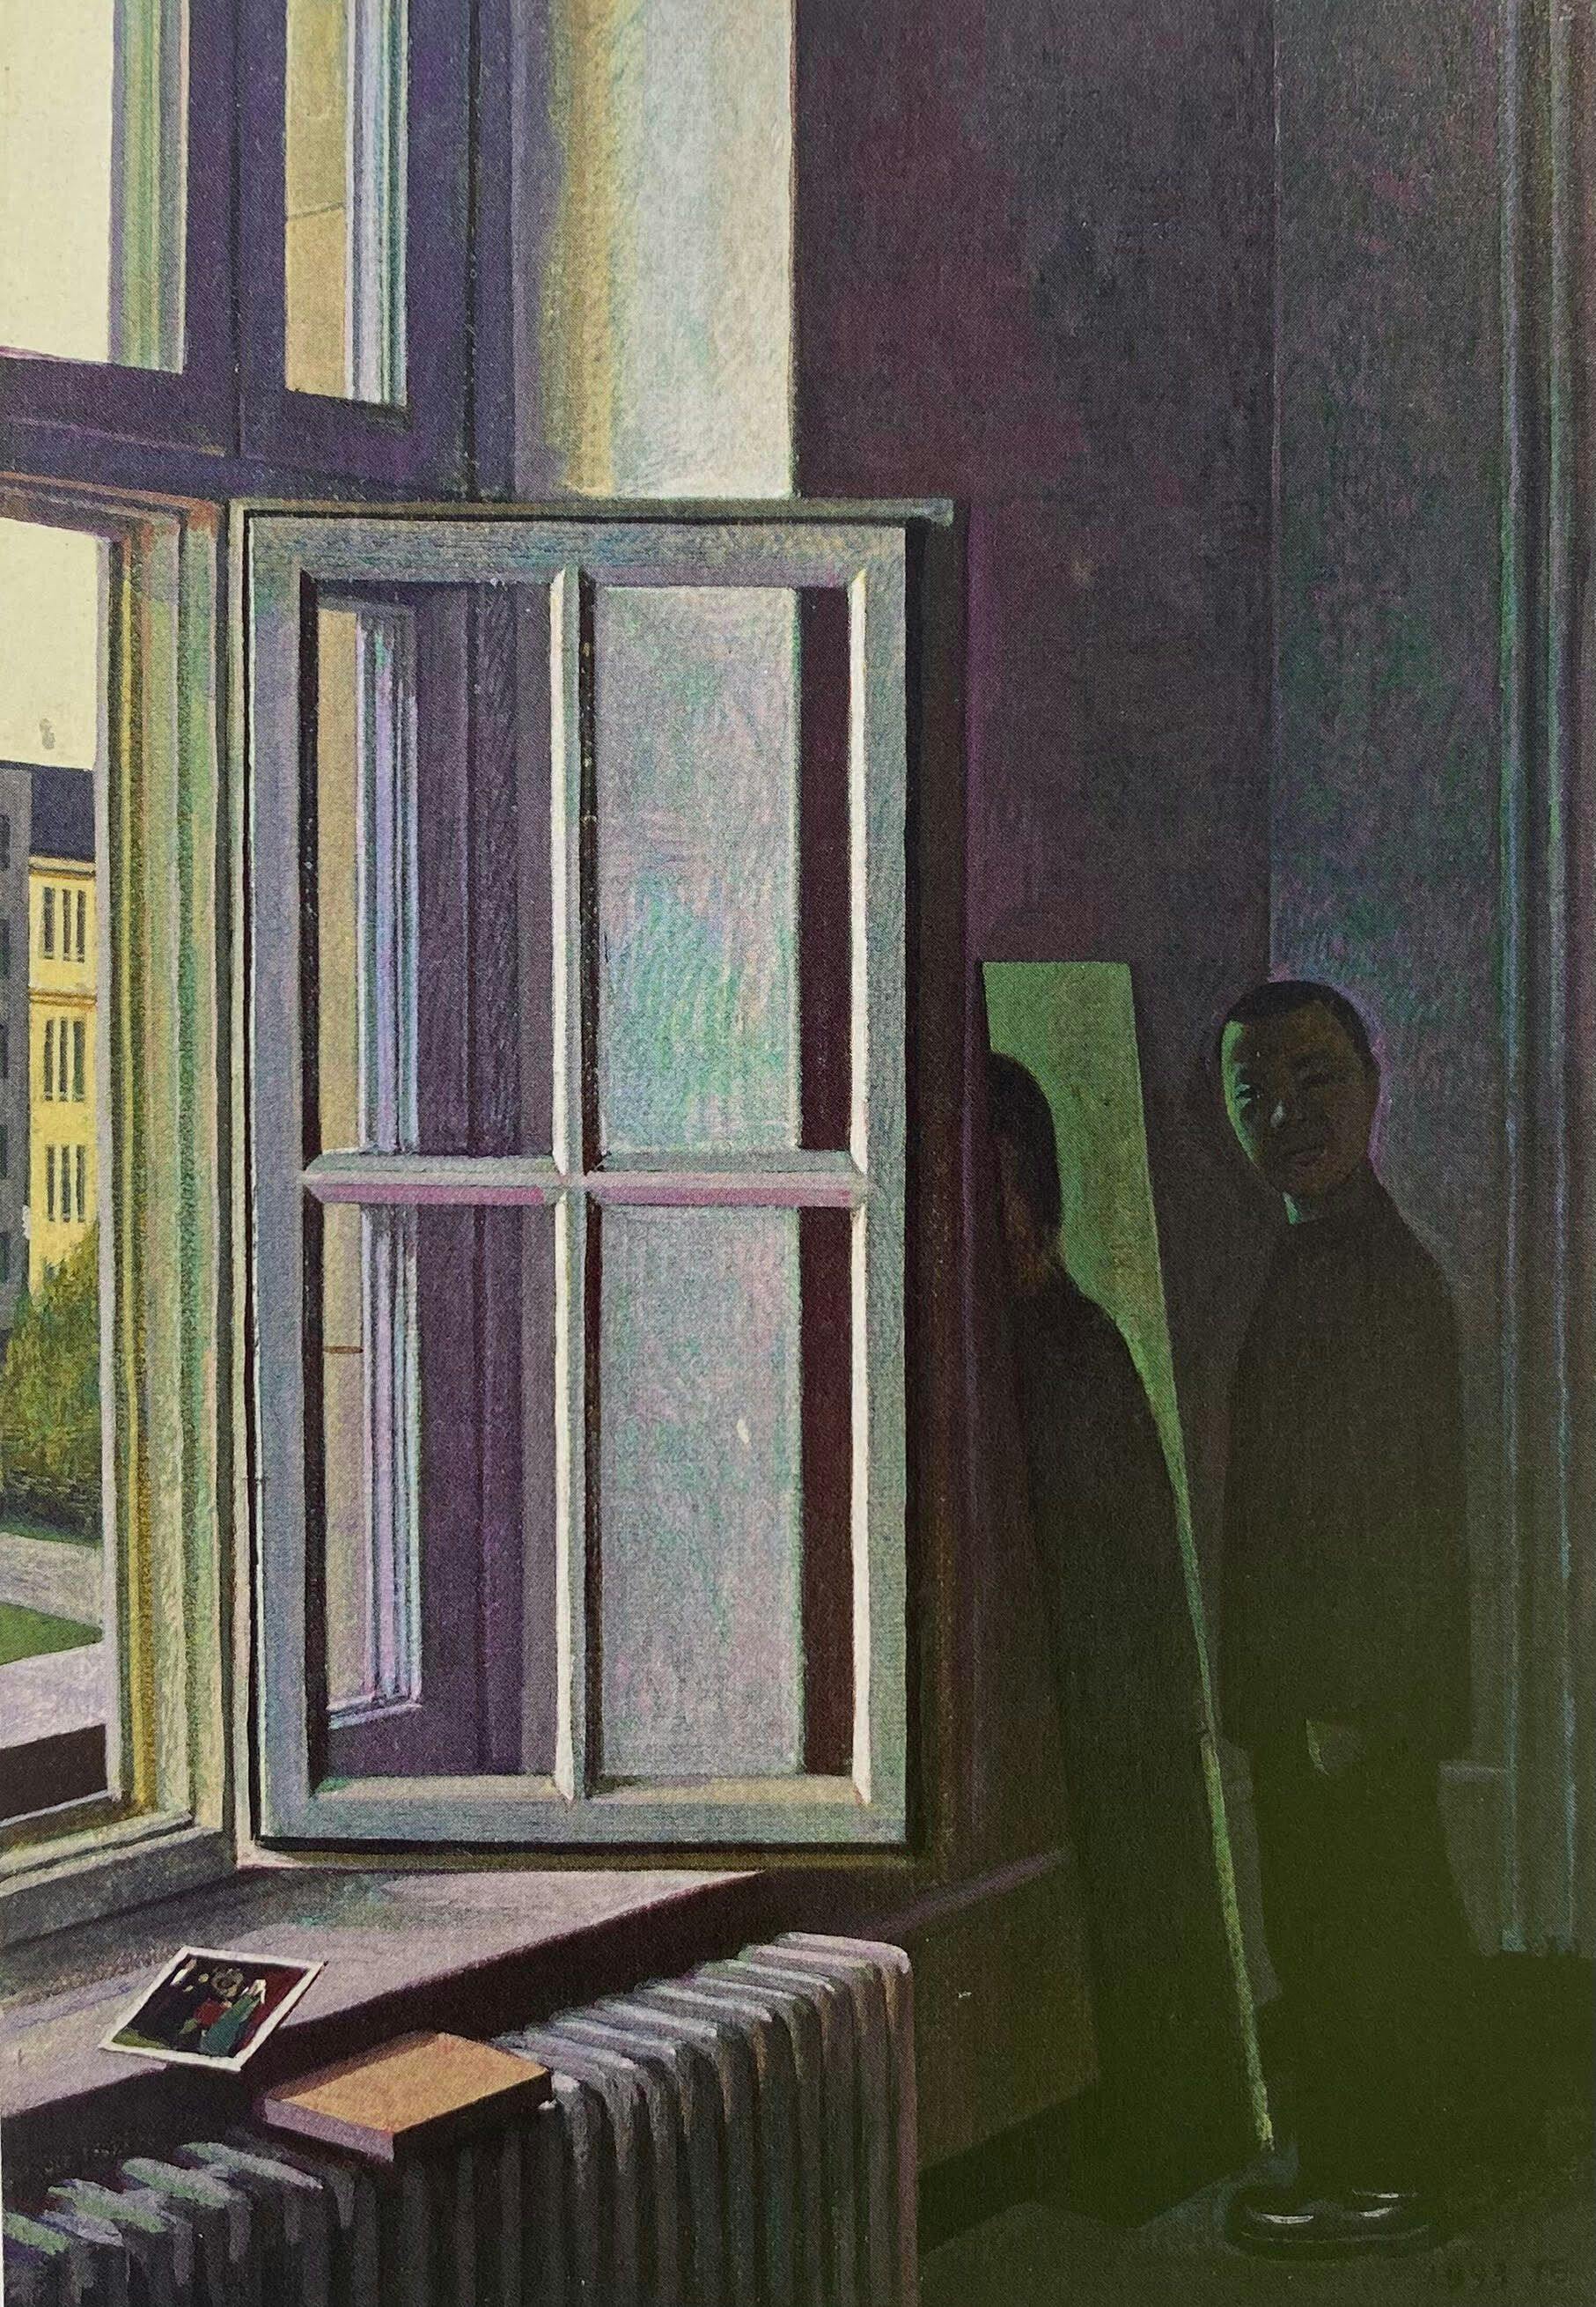 A painting by Liu Ye, titled ﻿Self Portrait in Studio, dated 1993.